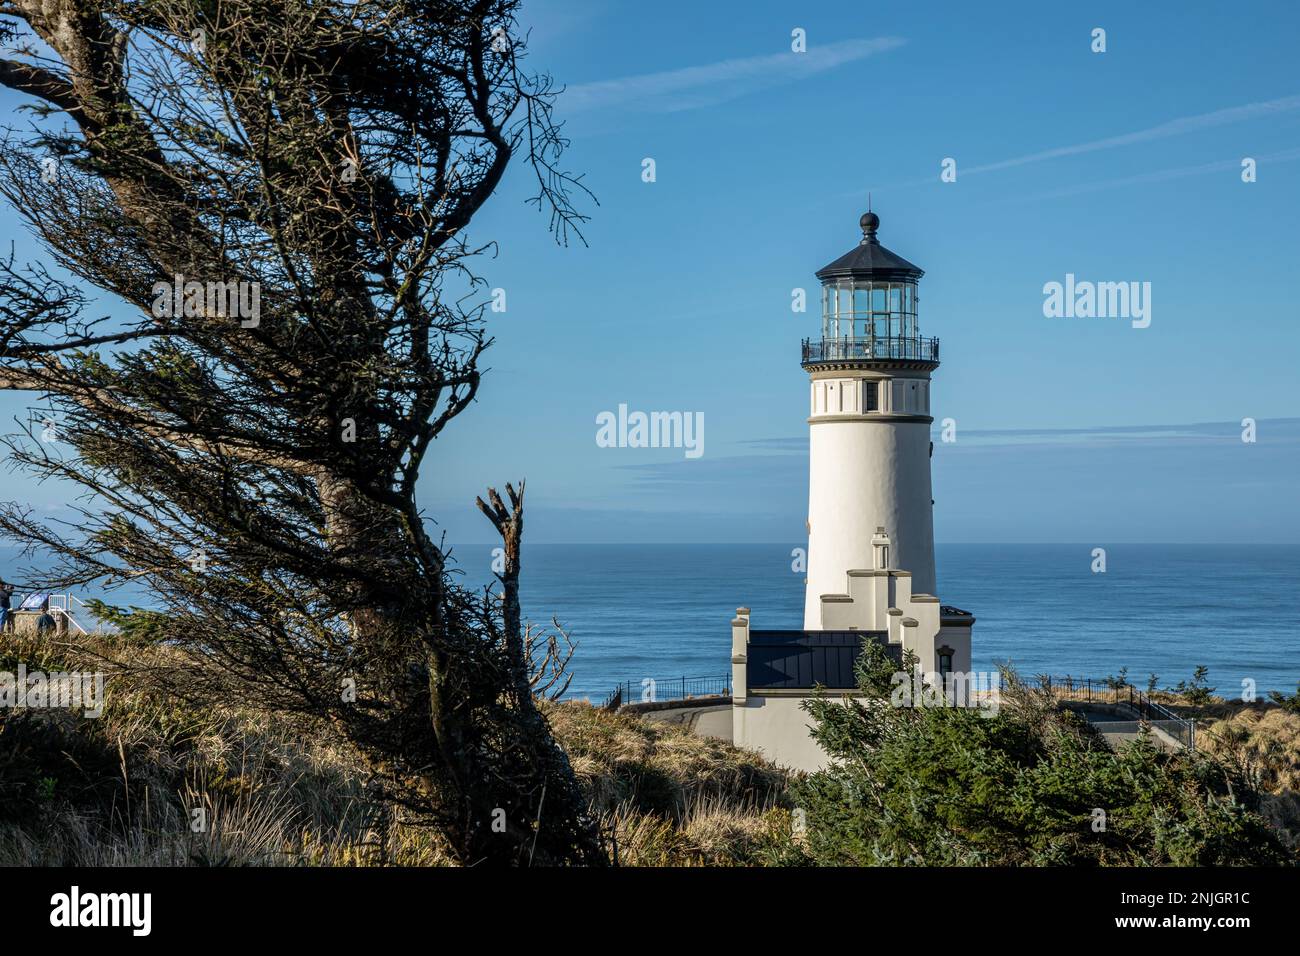 WA23022-00...WASHINGTON - Wind scultputered tree and the North Point Lighthouse overlooking the Pacific Ocean in Cape Disappointment State Park. Stock Photo